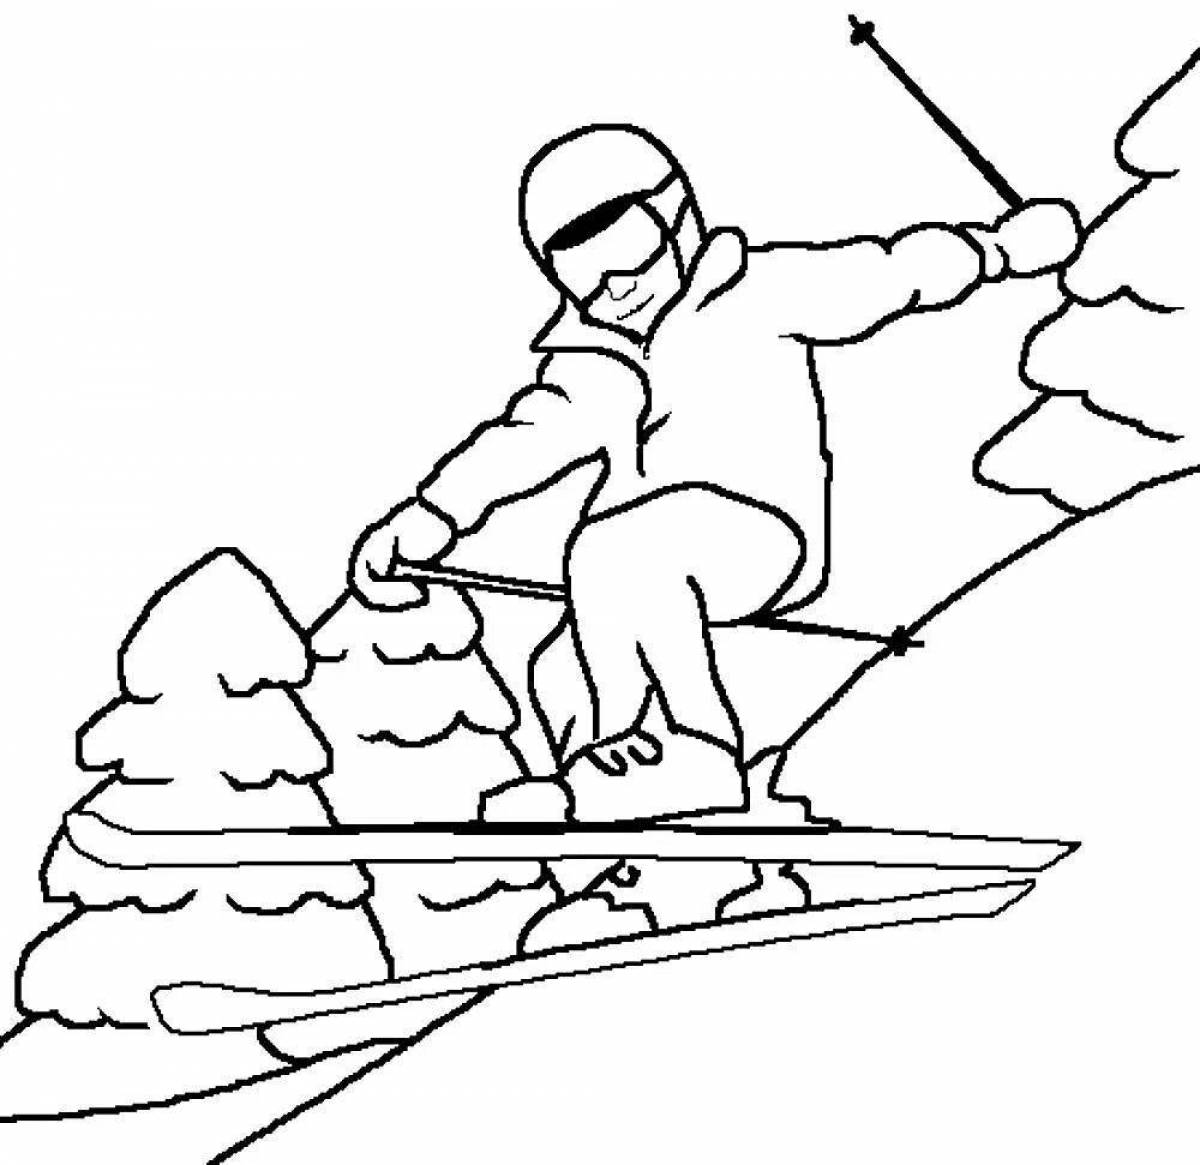 Coloring page cheeky baby skier